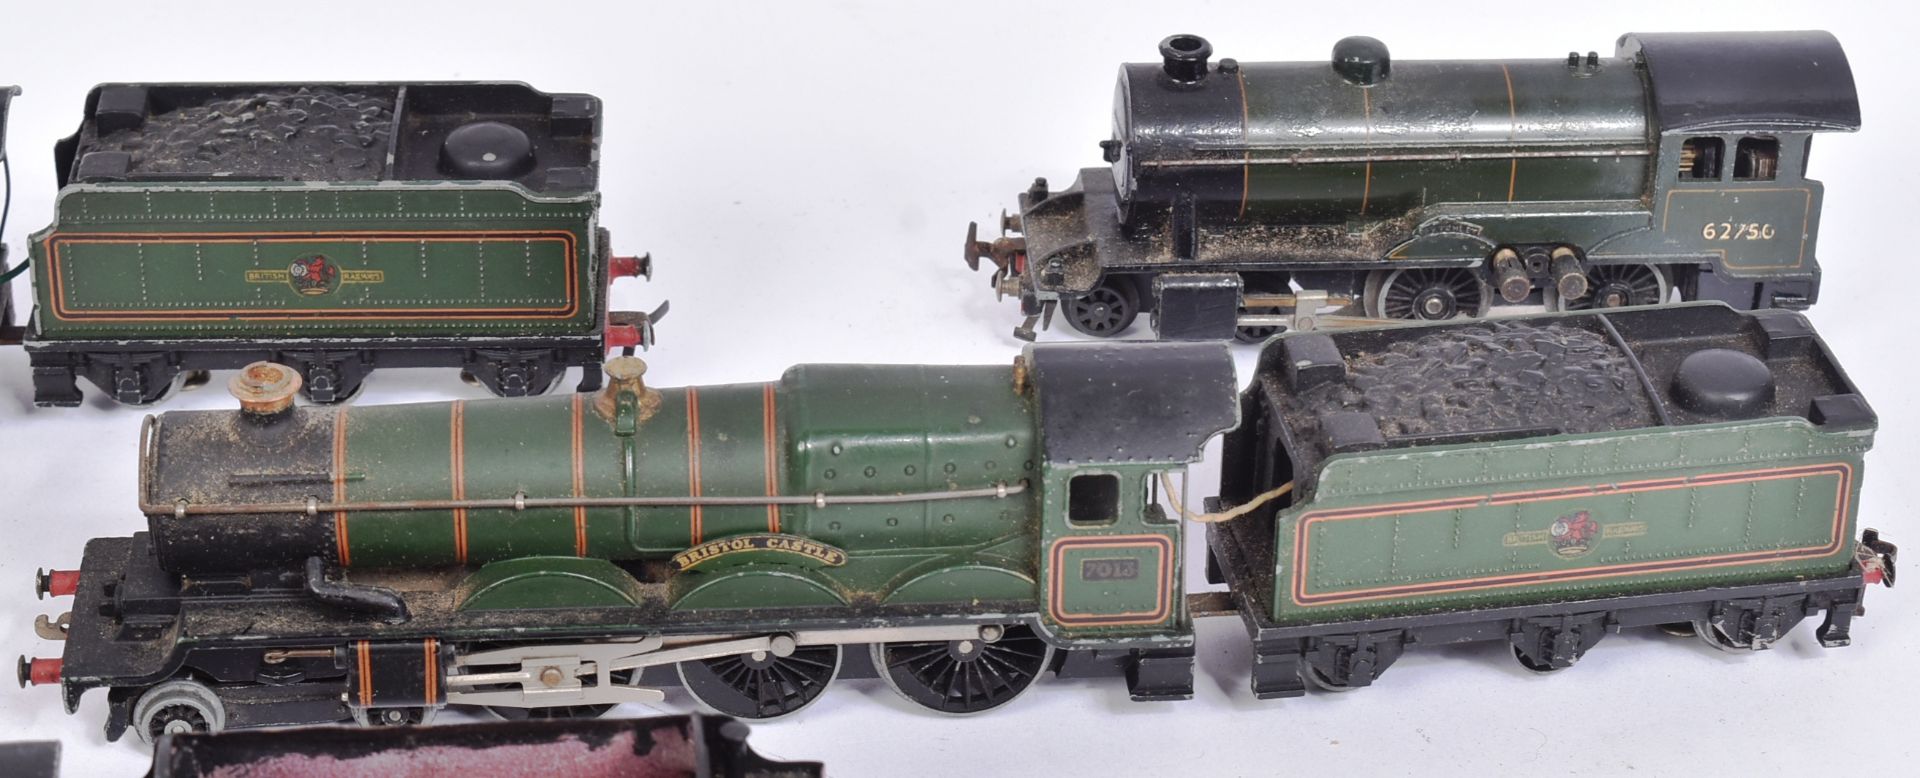 COLLECTION OF ASSORTED HORNBY DUBLO MODEL RAILWAY TRAINSET LOCOMOTIVE ENGINES - Image 2 of 5